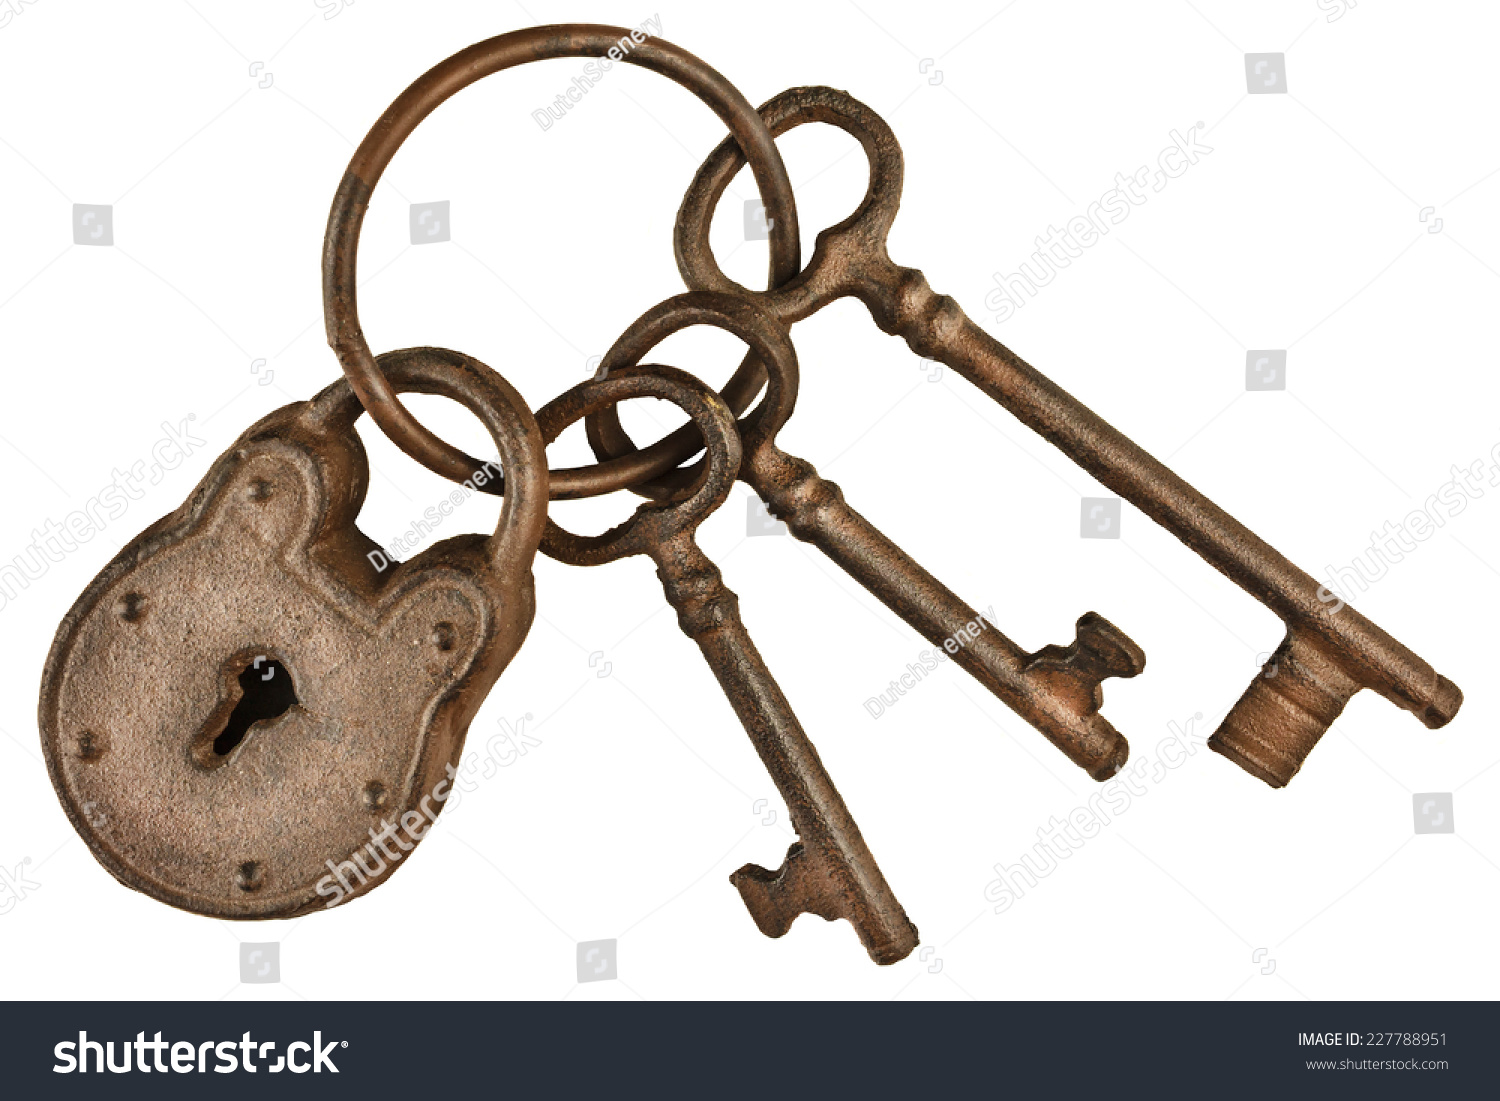 Rusted lock and keys attached on a keyring isolated on a white background #227788951